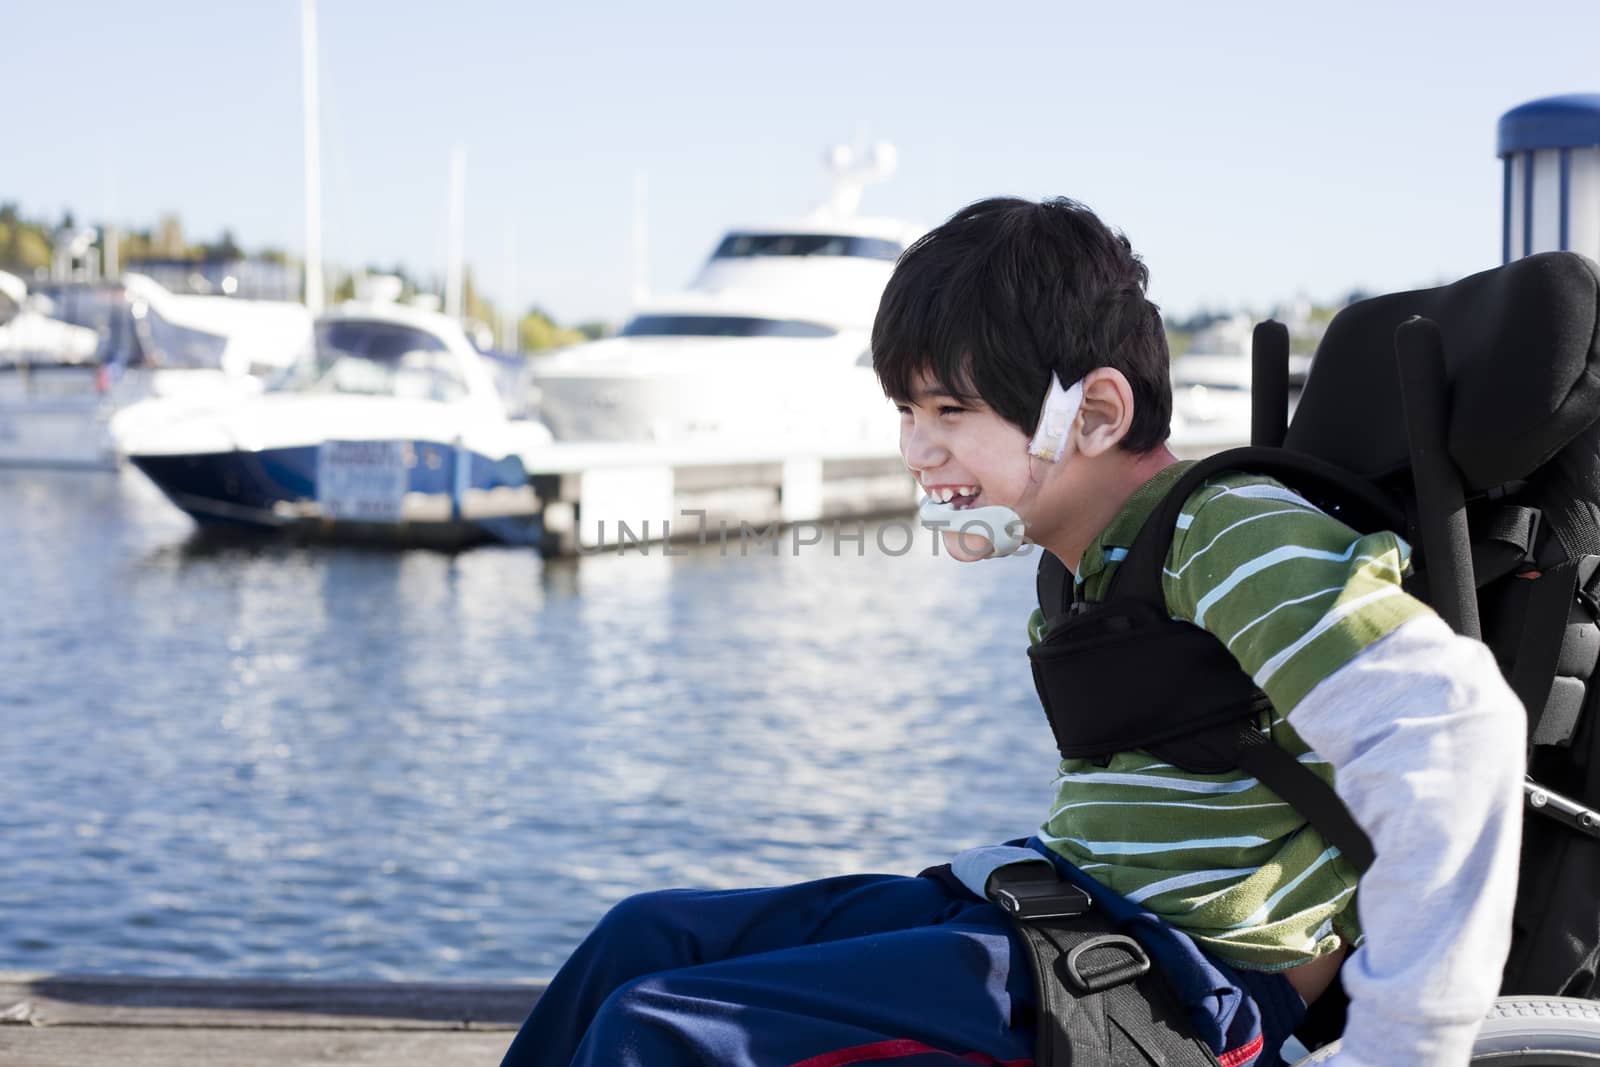 Disabled biracial six year old boy pushing himself in wheelchair on lake pier